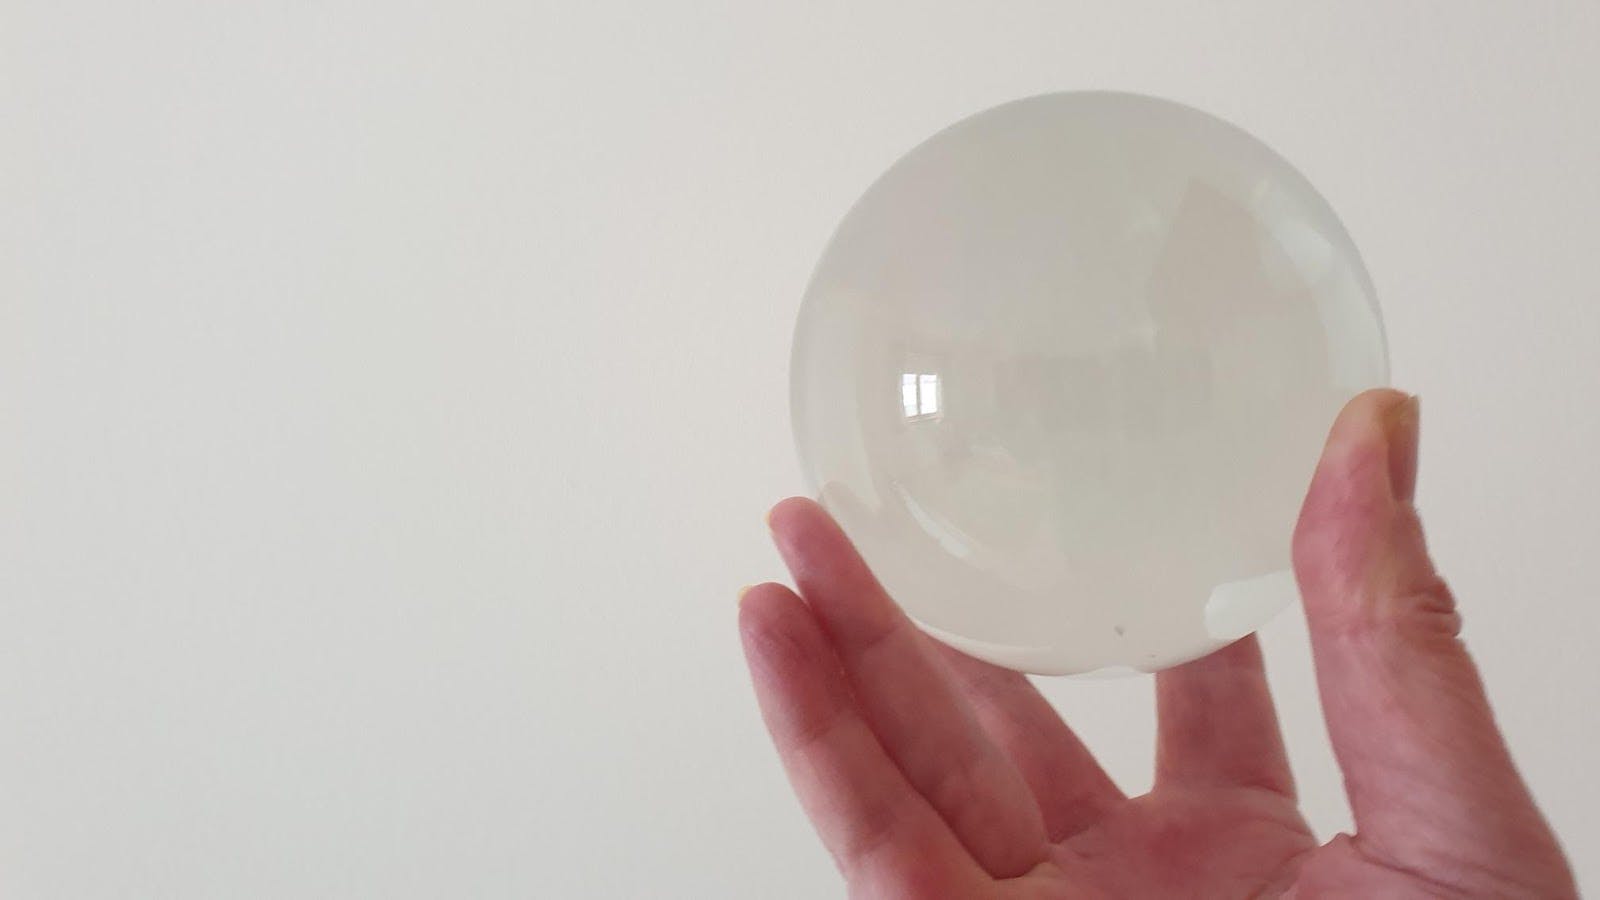 glass ball held in a hand